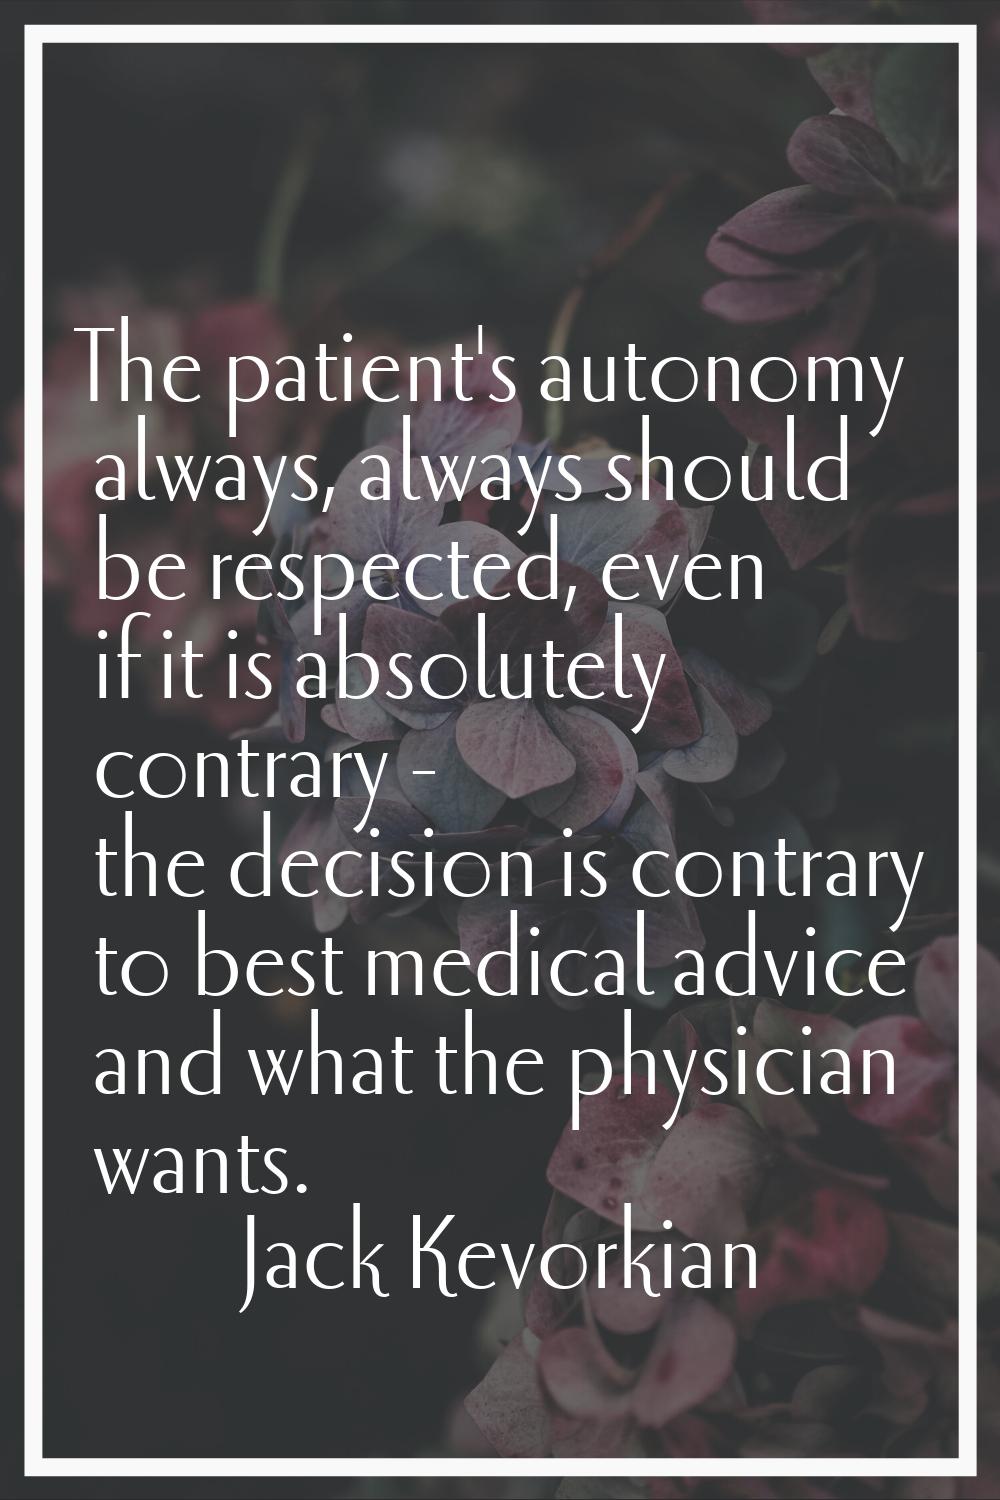 The patient's autonomy always, always should be respected, even if it is absolutely contrary - the 